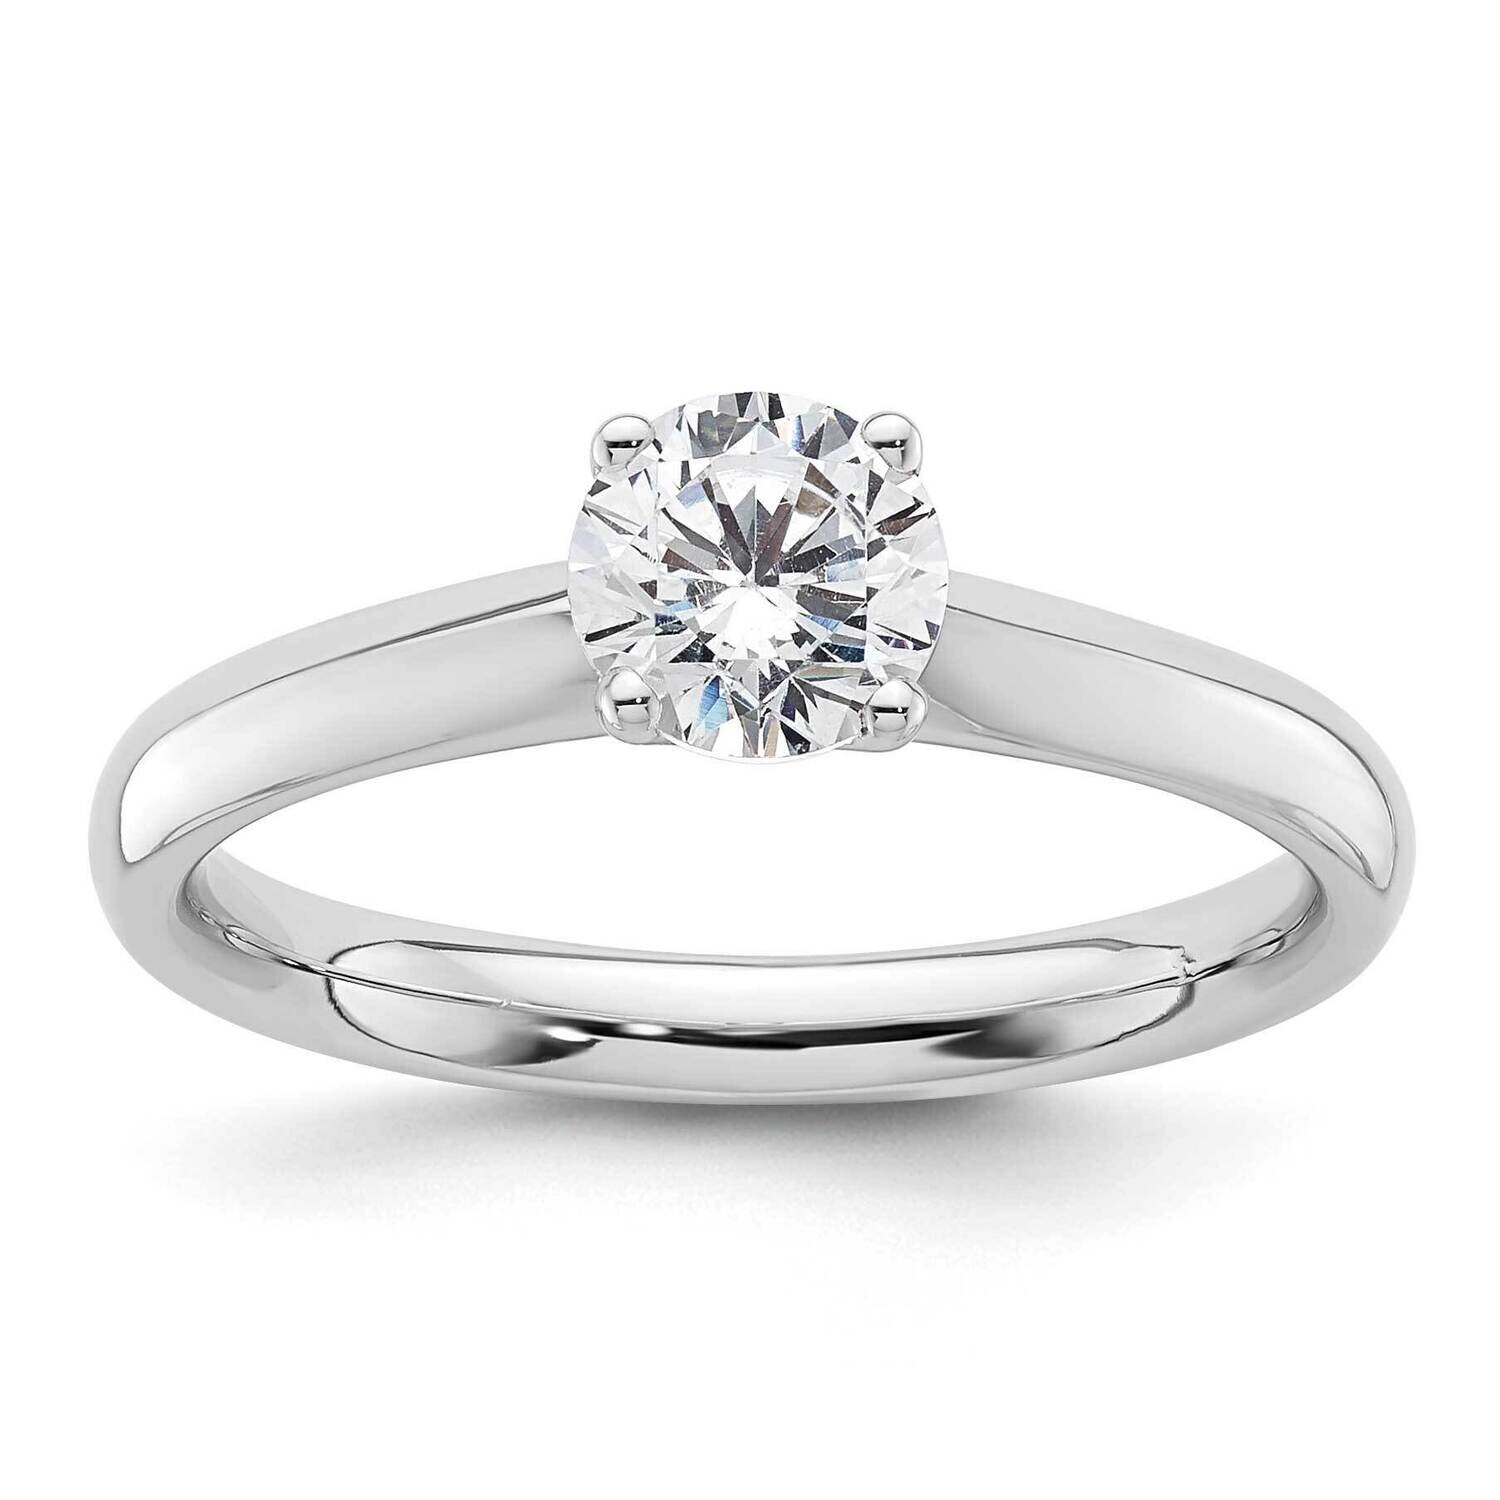 3/4 Carat 5.80 mm 4-Prong Round Solitaire Engagement Ring Mounting 14k White Gold RM1933E-075-CWAA